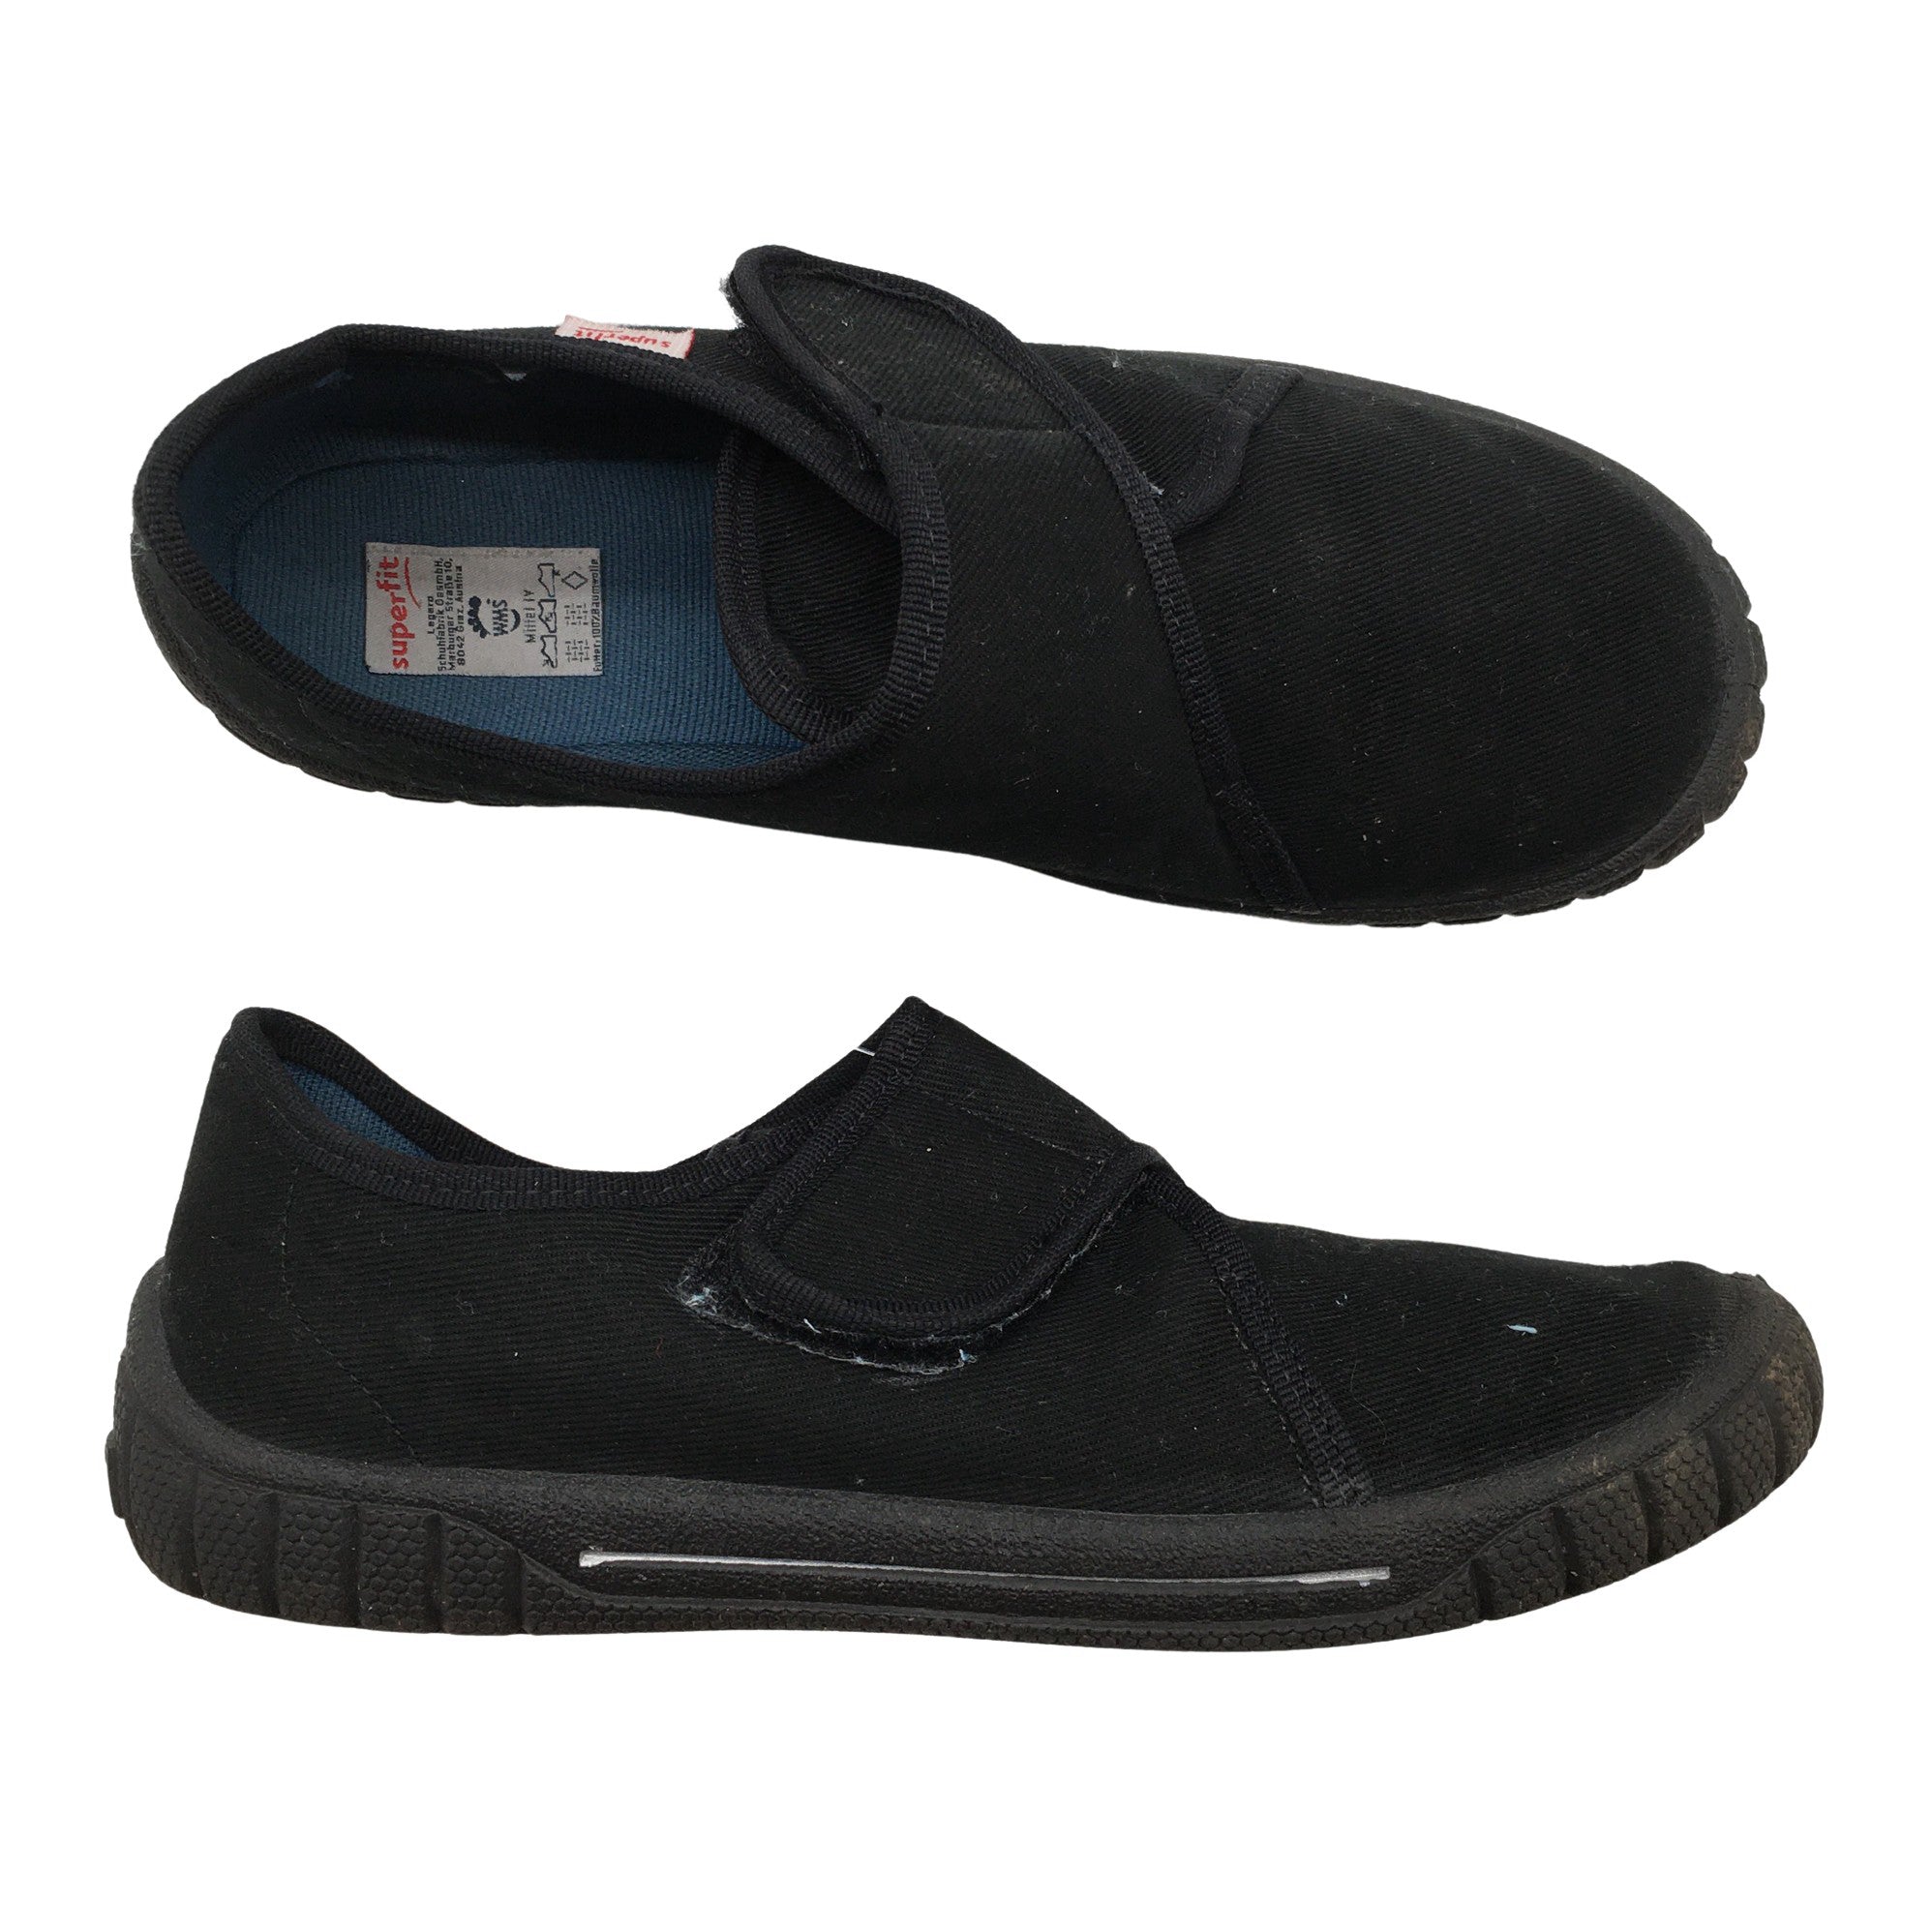 | (Black) sneakers, size Emmy Casual SuperFit 33 Unisex